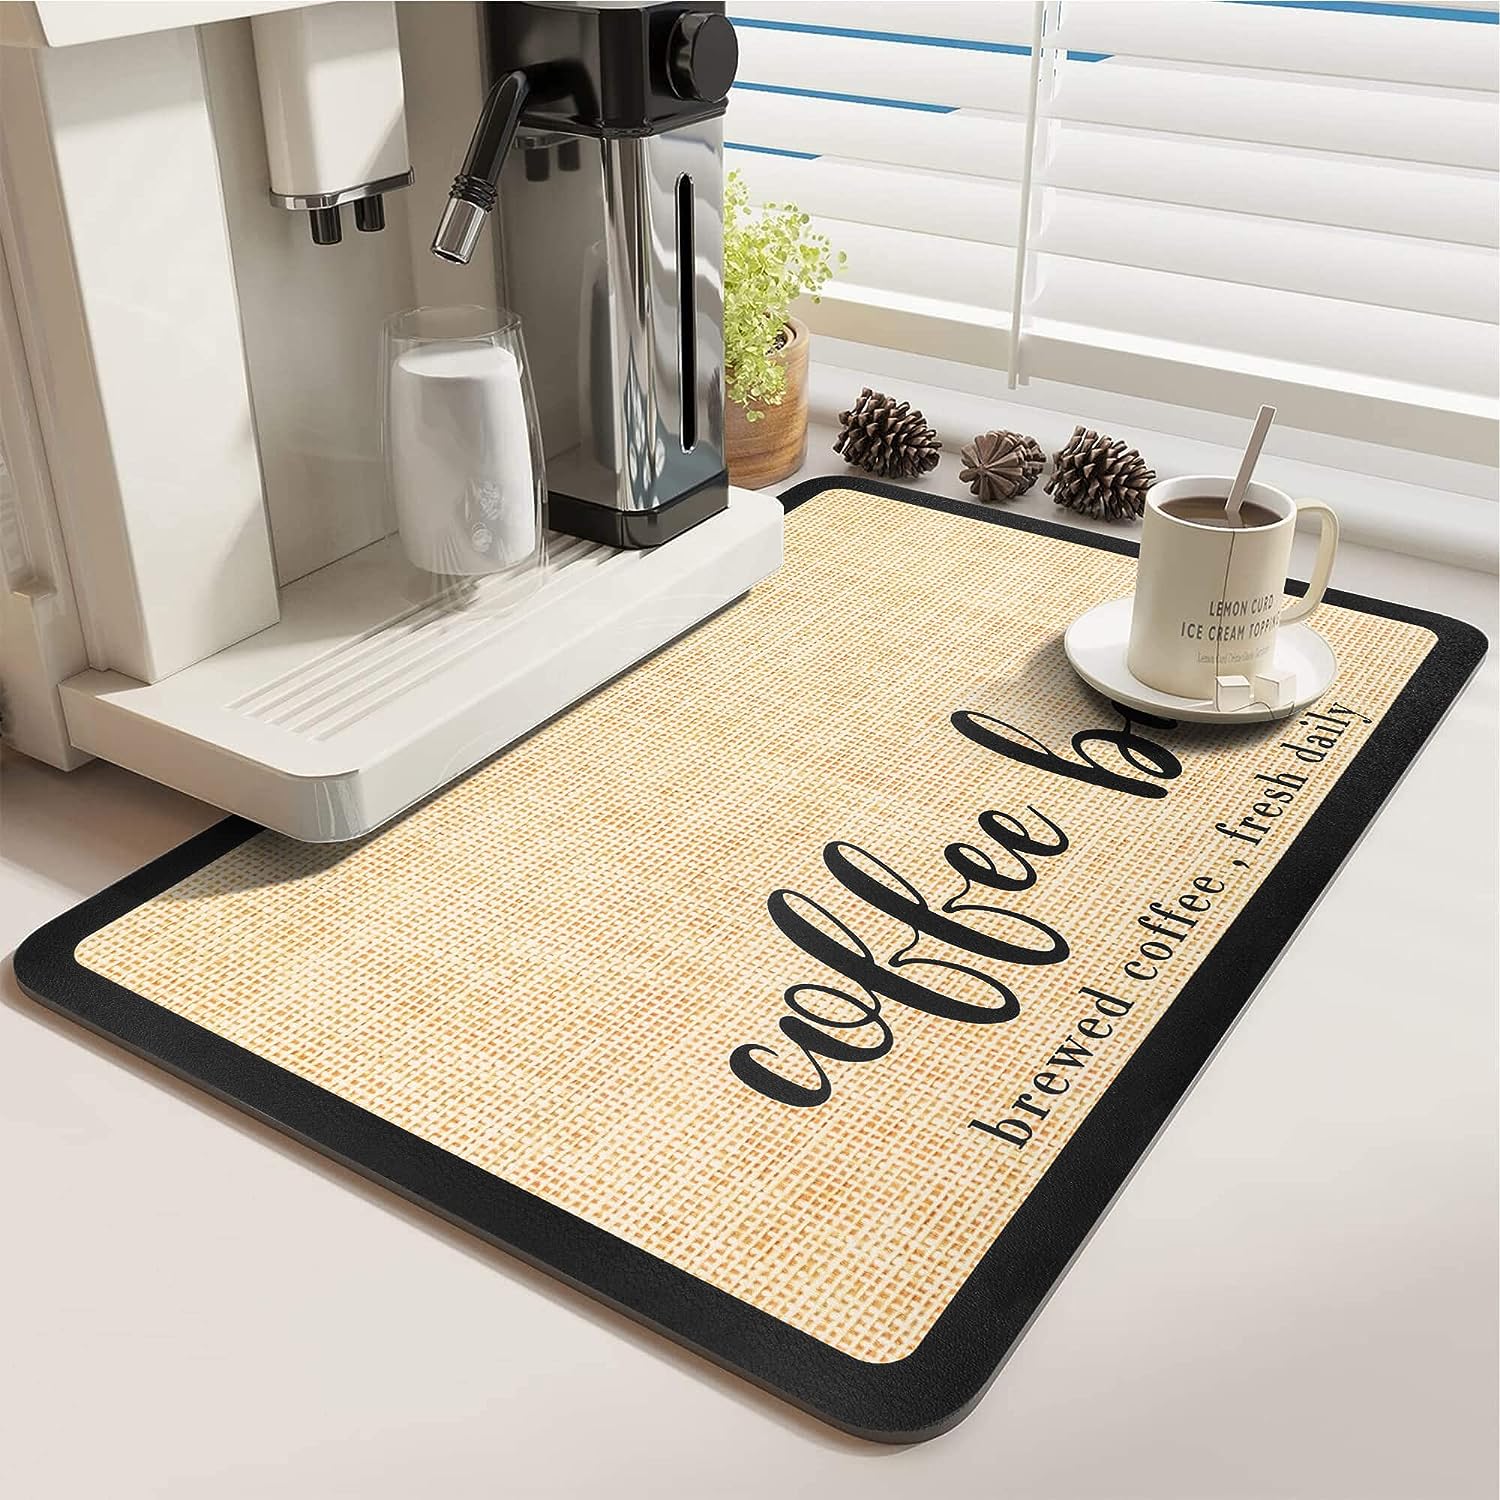 DK177 Coffee Mat Coffee Bar Mat - Hide Stain Absorbent Rubber Backed Quick Drying Mat Fit Under Coffee Maker Espresso Machine - Coffee Bar Accessories Kitchen Counter Dish Drying Mat, 19x12